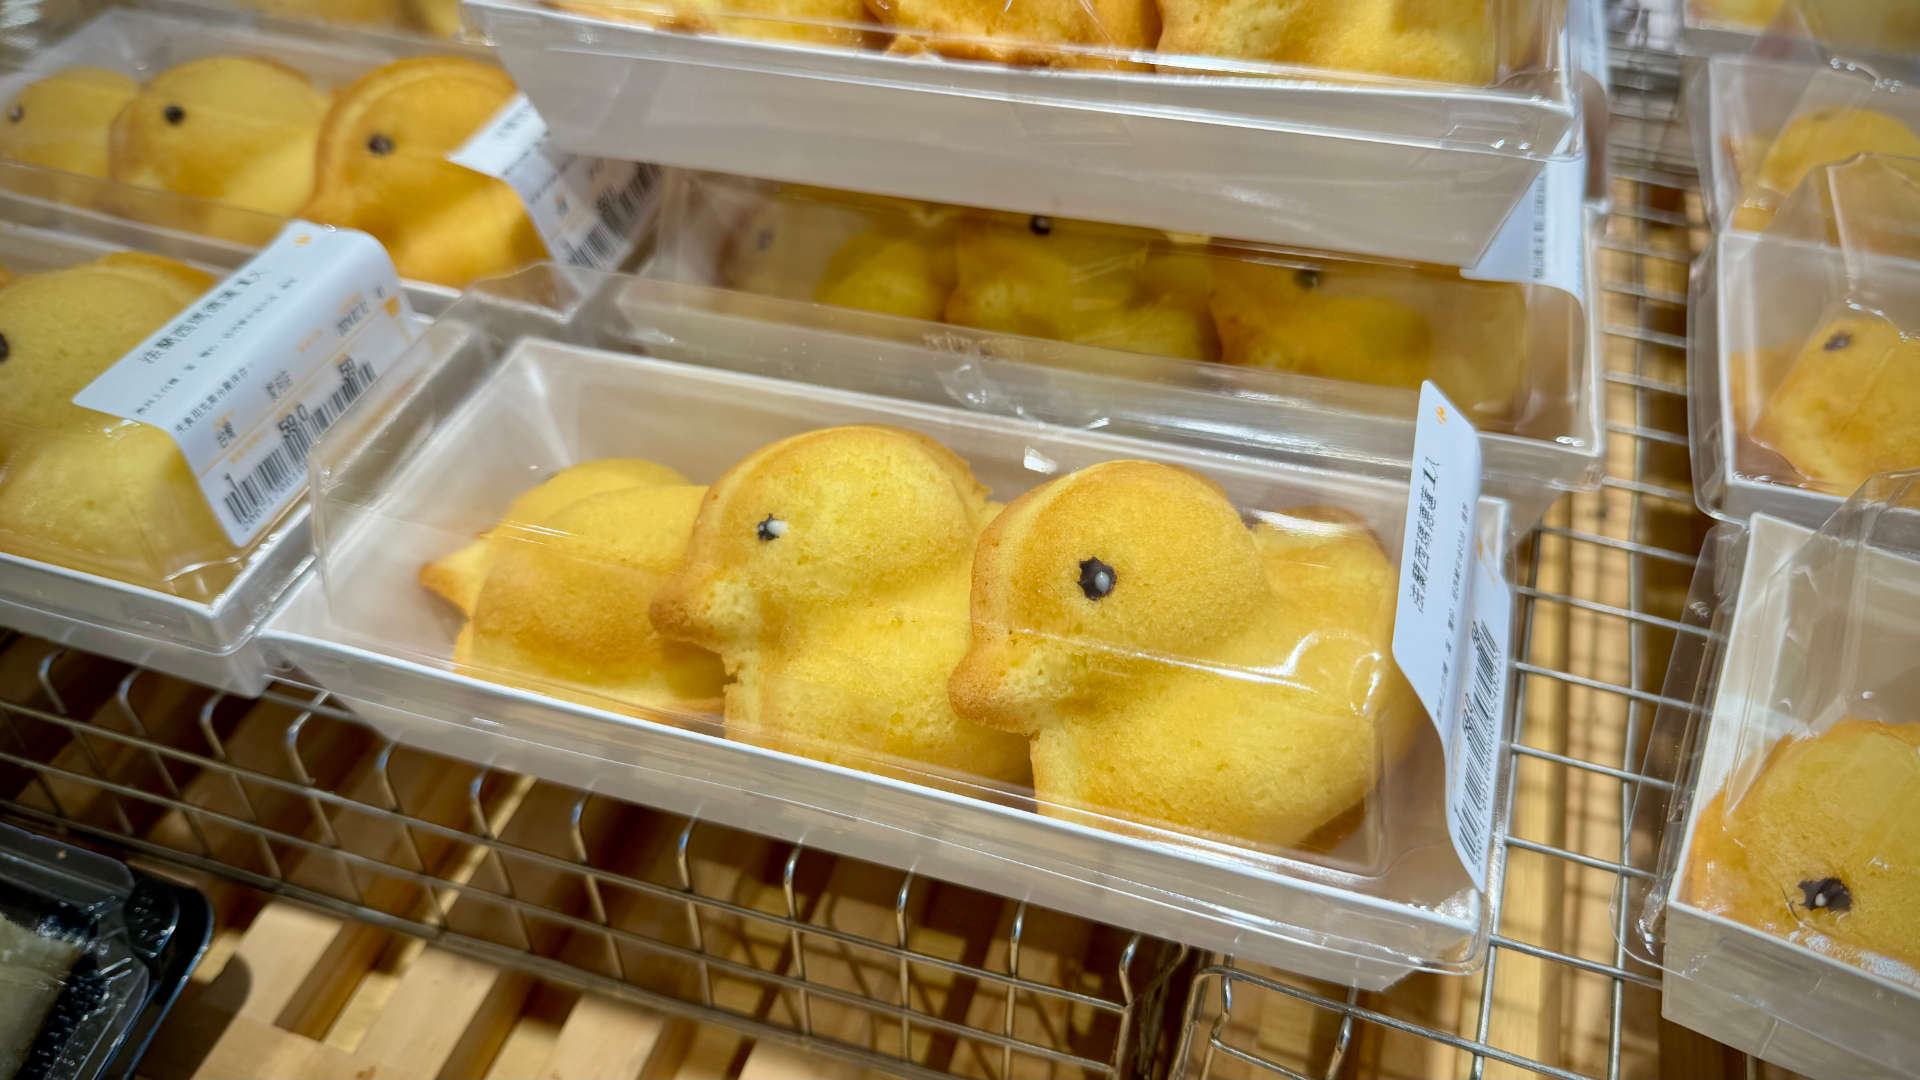 Yellow duck-shaped cakes in packs of three.